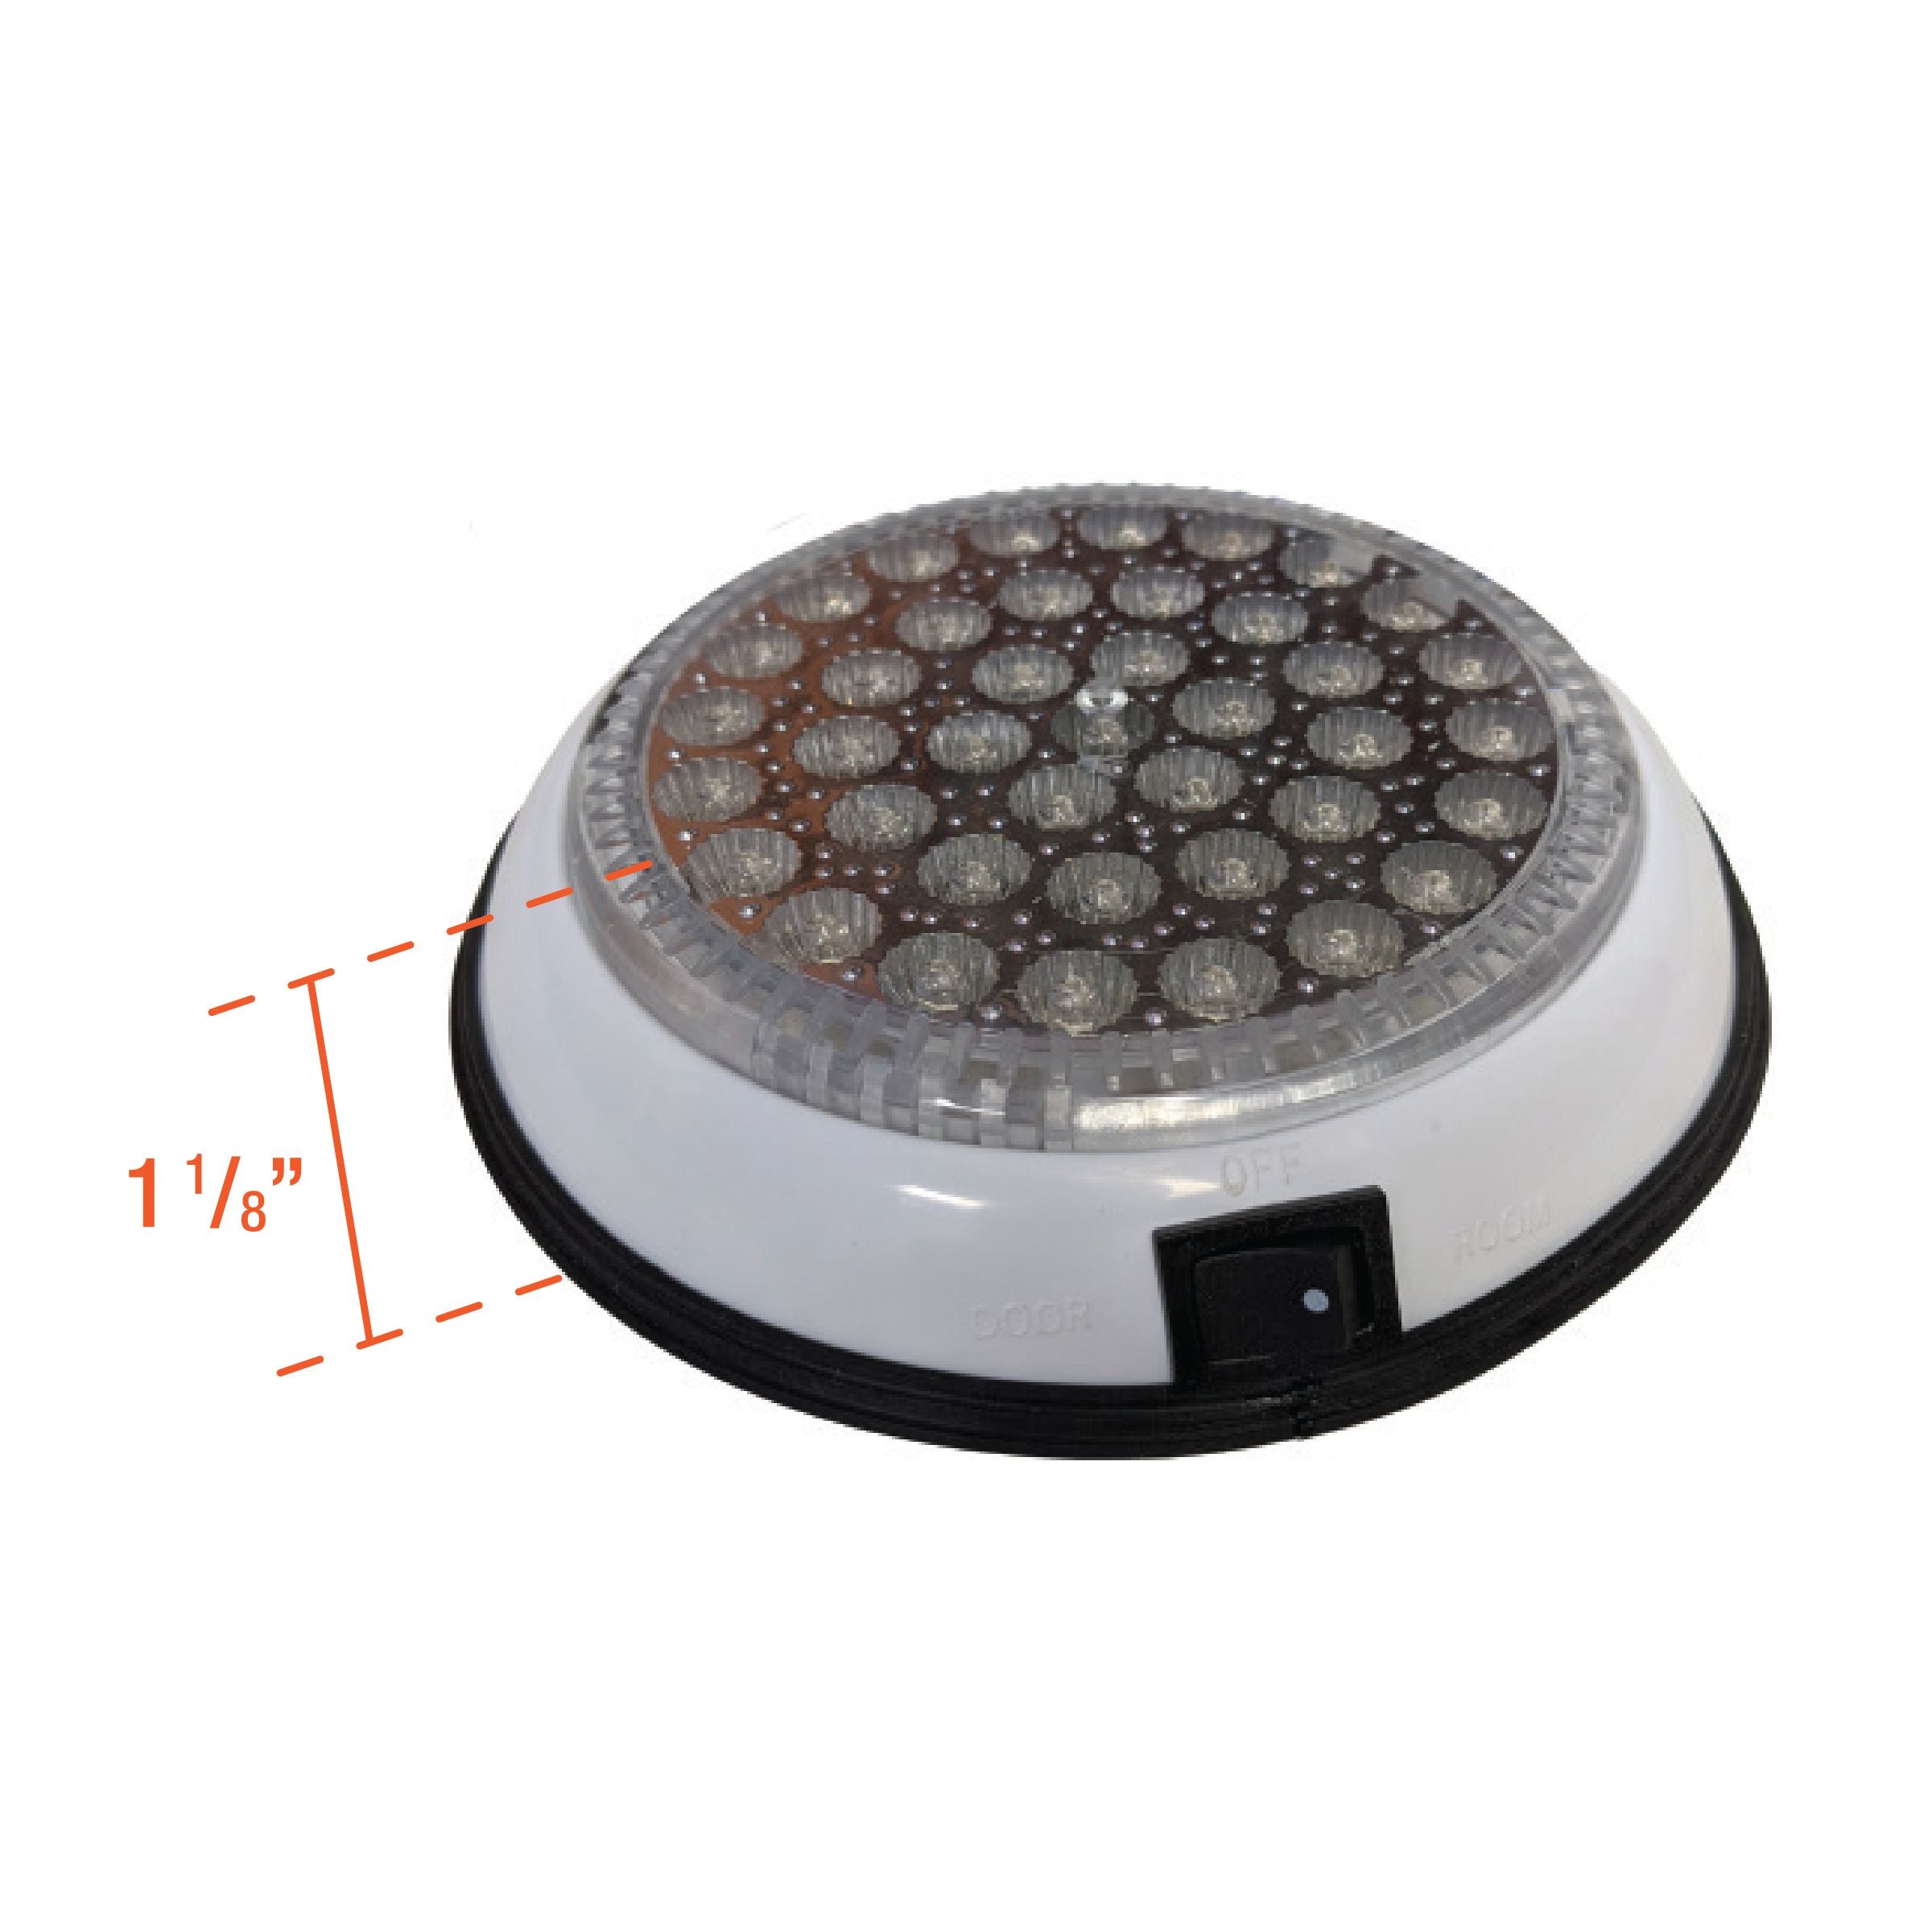 Uni-Bond LDL6000C - Round Utility/Dome Lamp with On-Off Switch - 6"